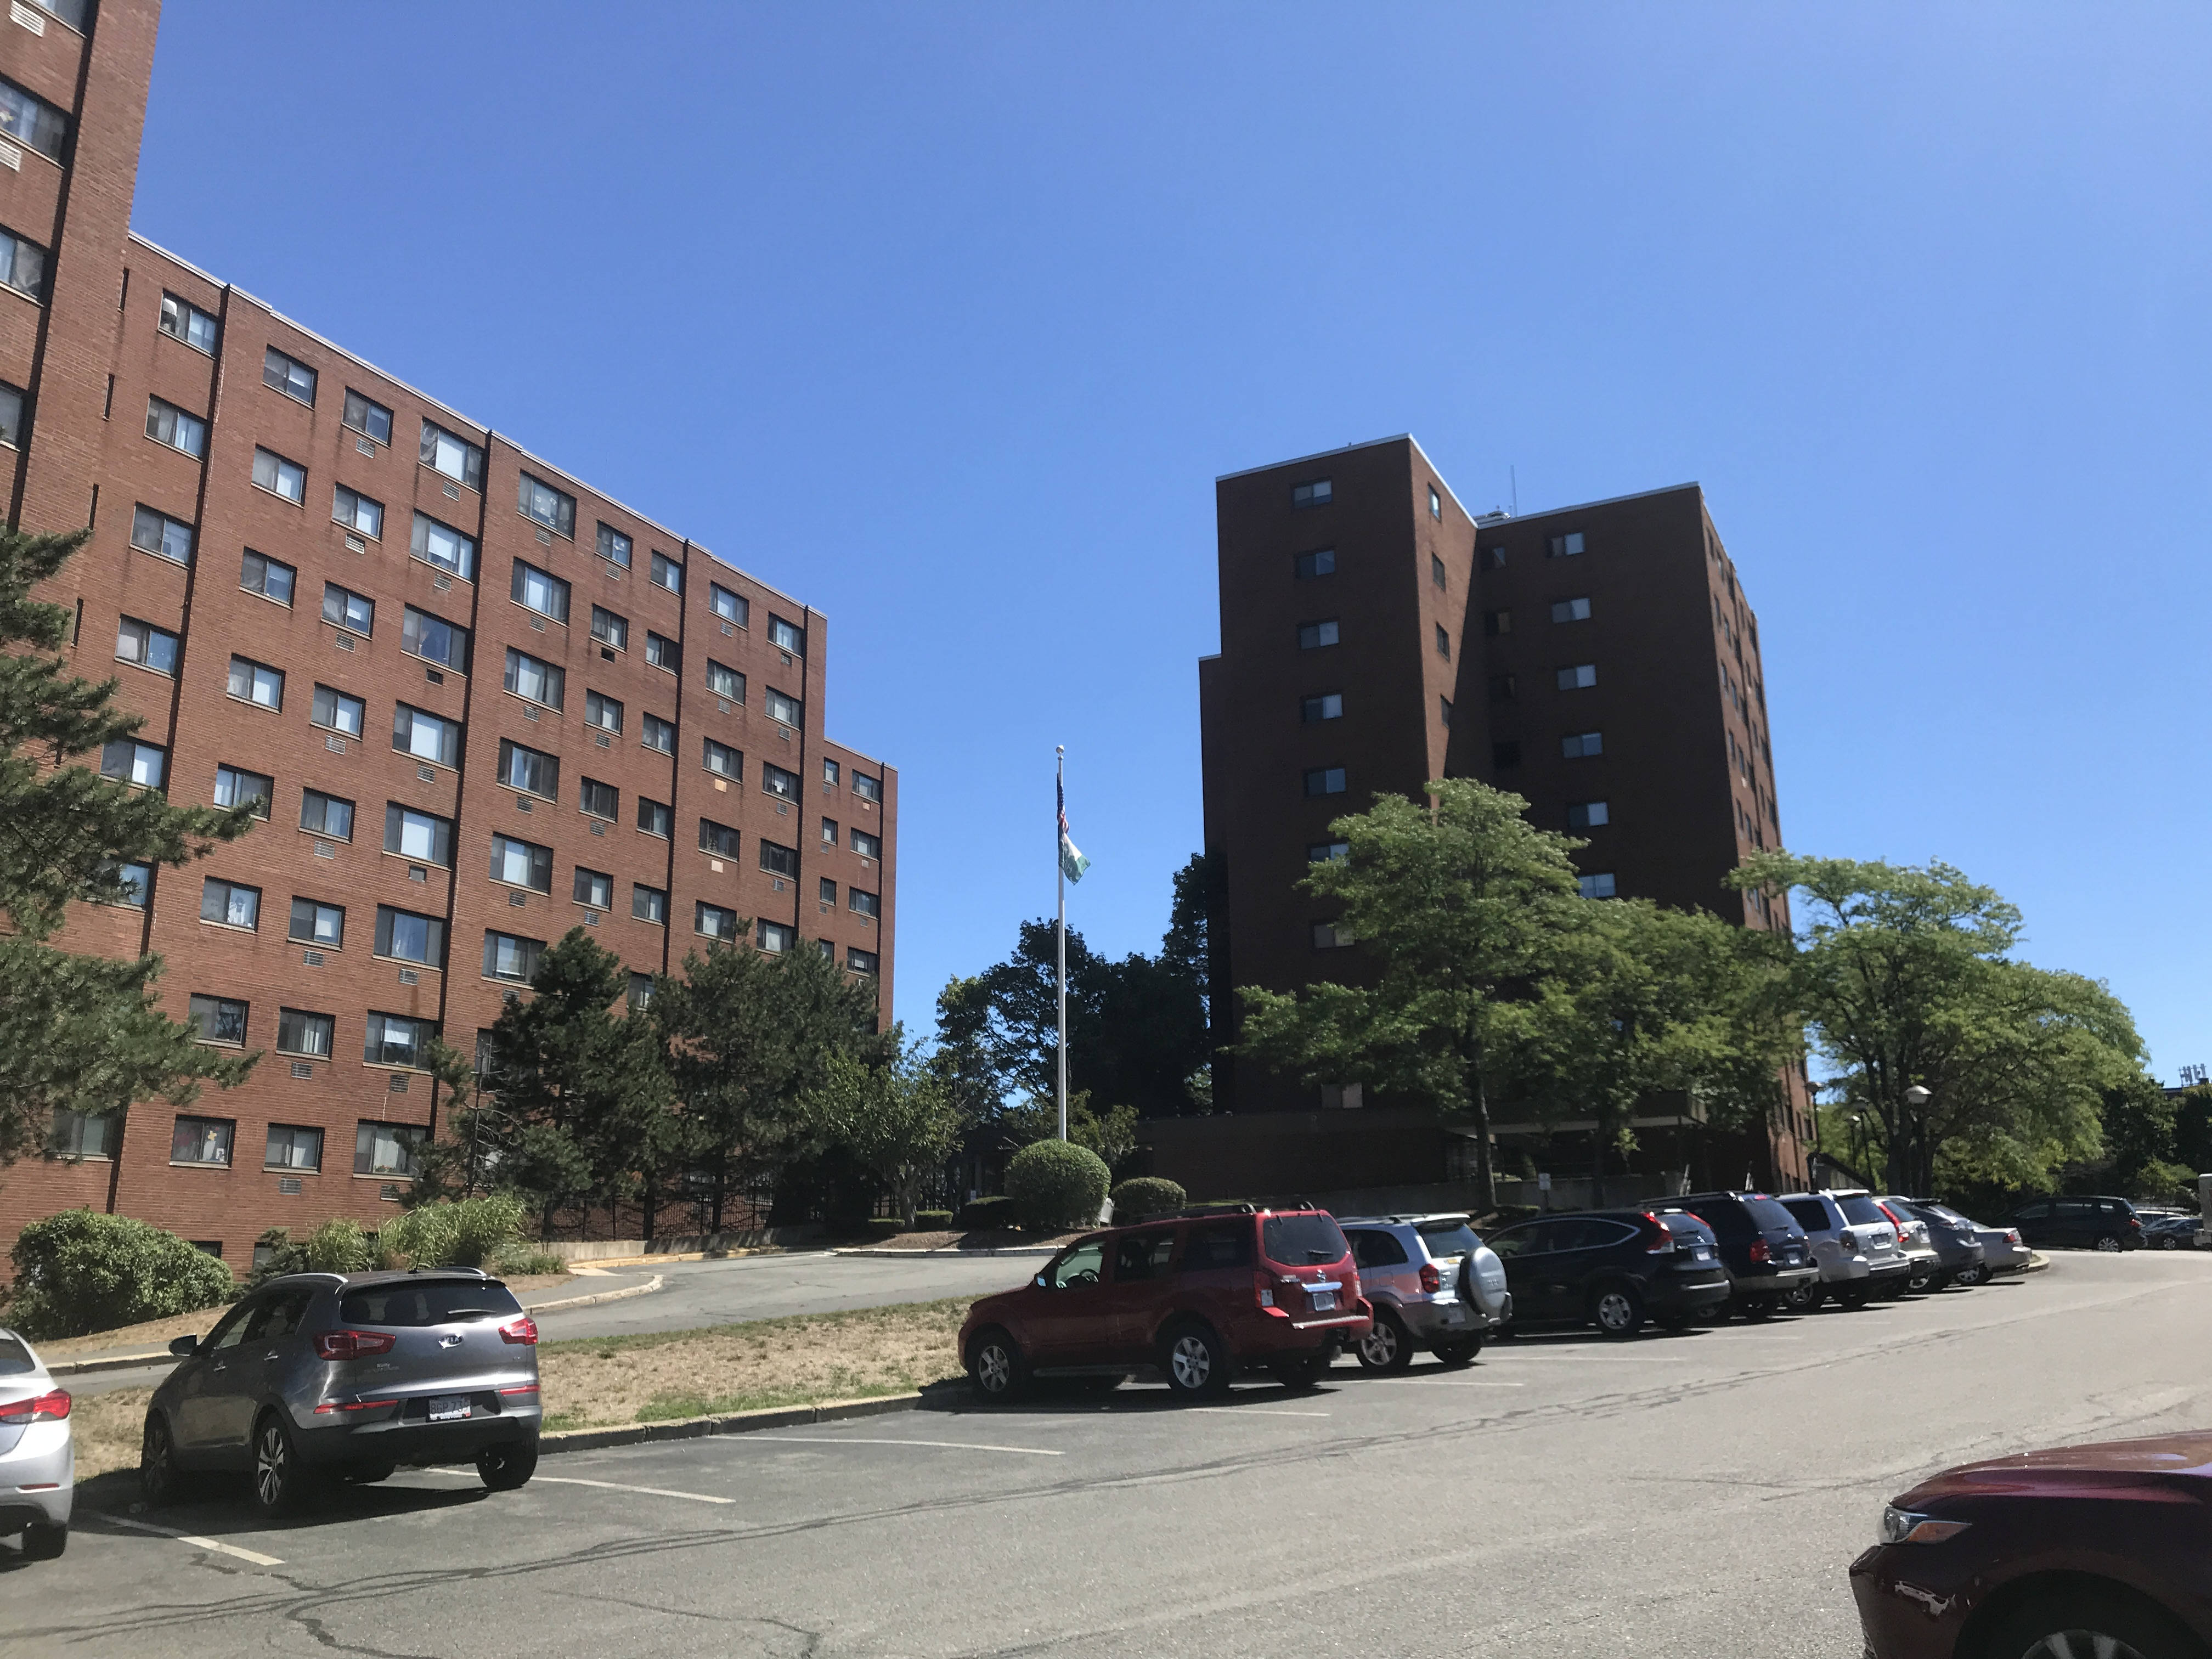 A view from the Salem Heights parking lot, showing two large rectangular brick buildings, approximately eight stories high